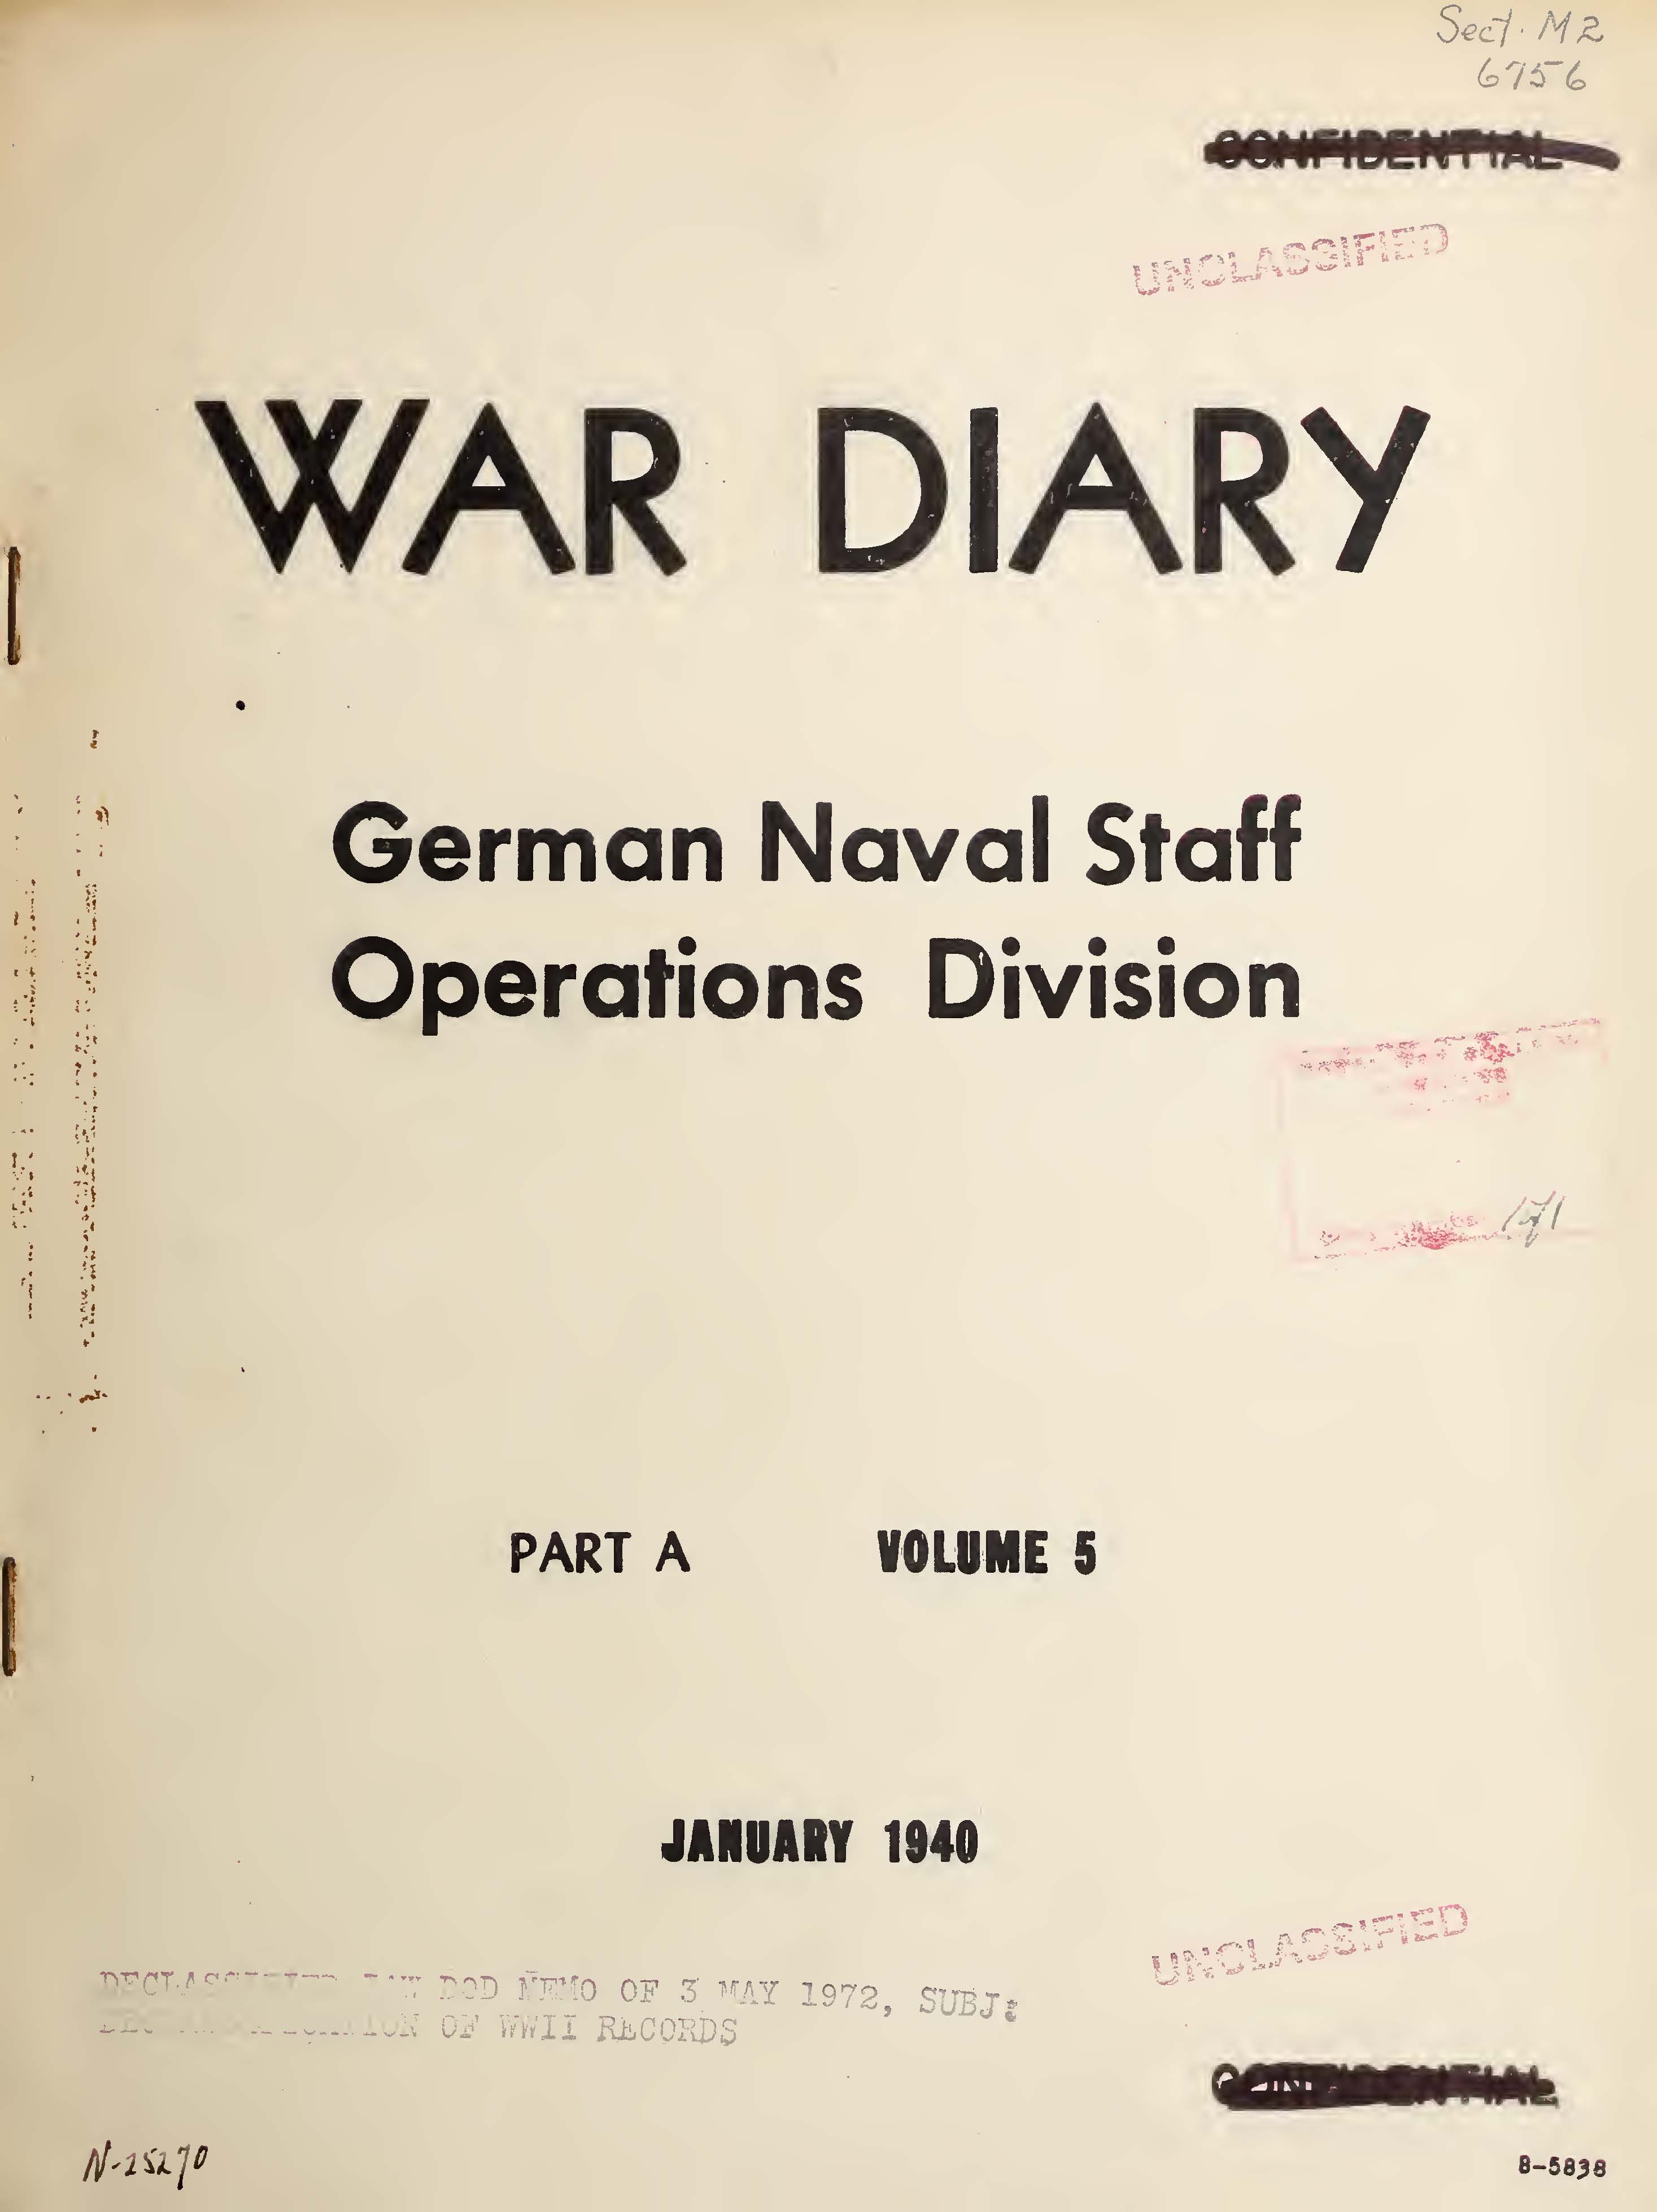 War Diary of German Naval Staff (Operations Division) Part A, Volume 5, January 1940